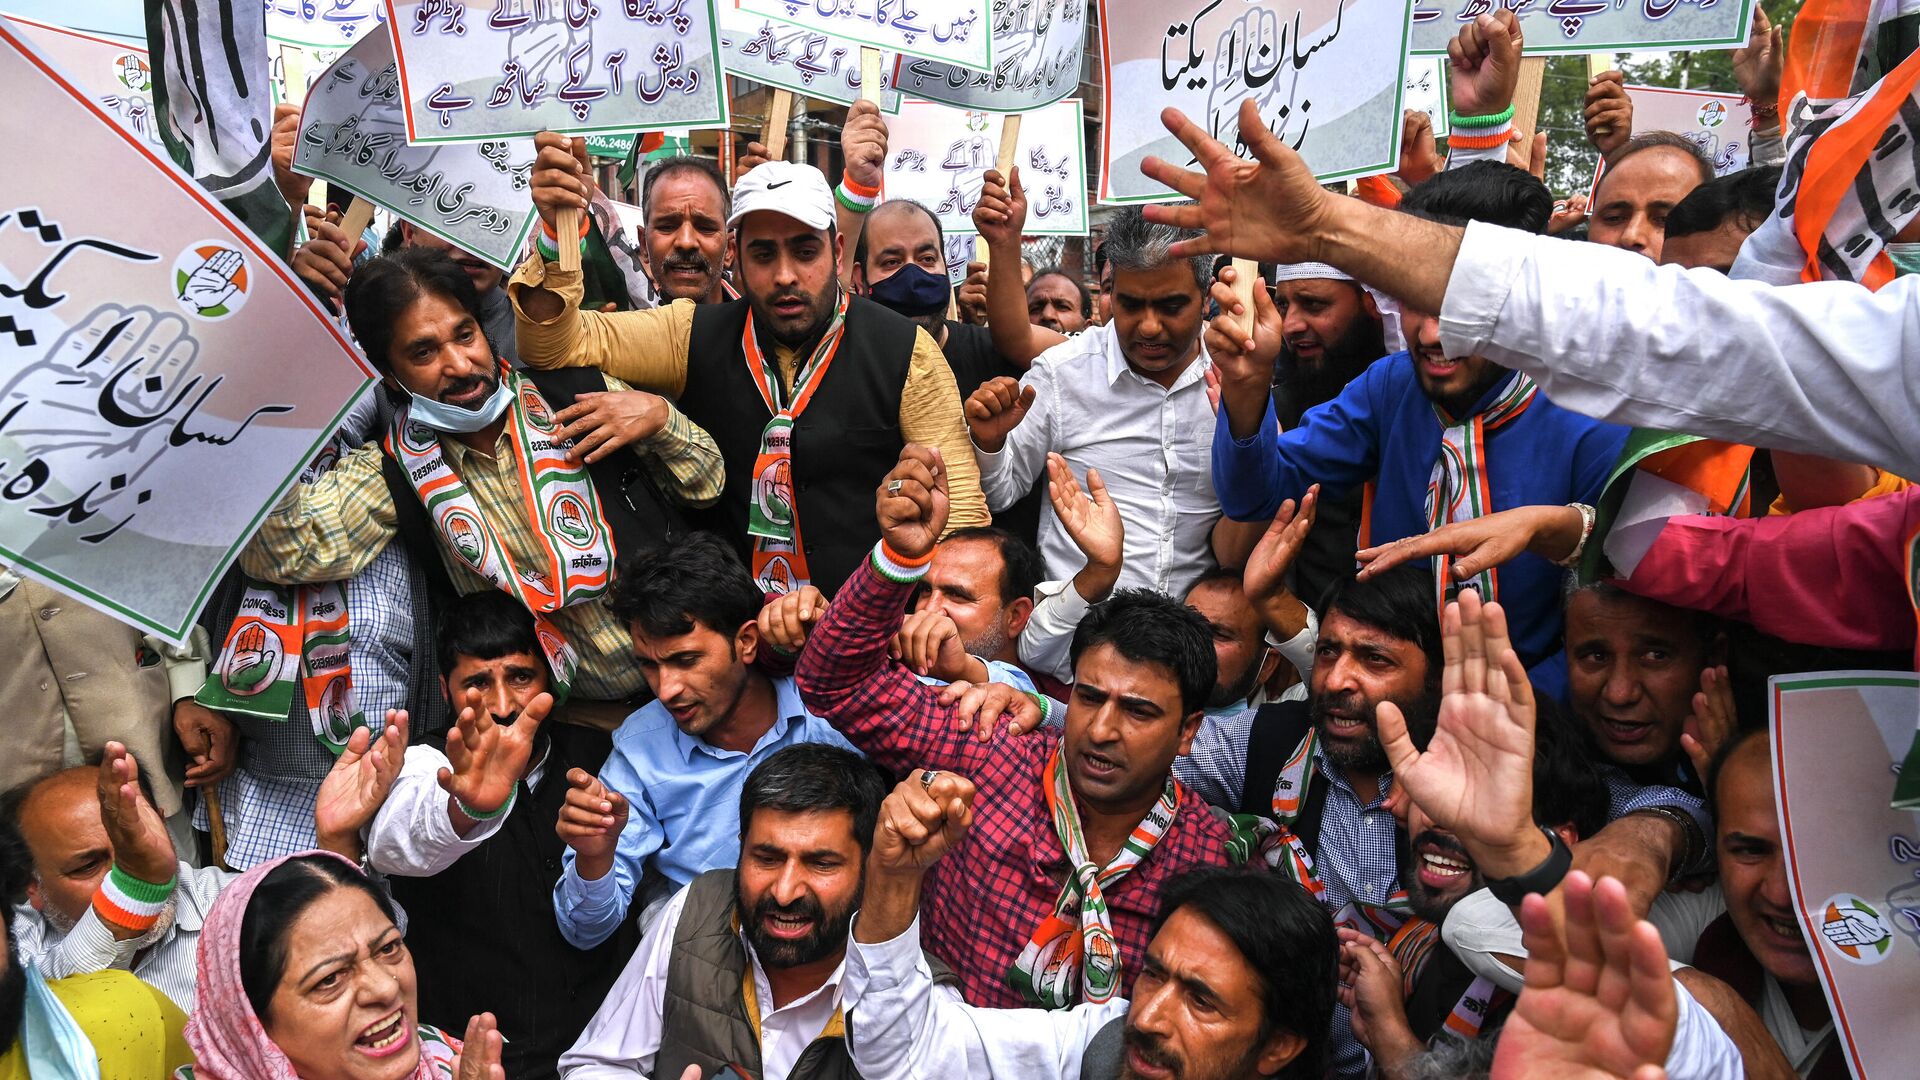 Supporters of India's opposition Congress party shout slogans during a demonstration in Srinagar on October 5, 2021, after at least nine people were killed in a recent incident involving protesting farmers in Lakhimpur Kheri district of the Indian state of Uttar Pradesh - Sputnik International, 1920, 10.10.2021